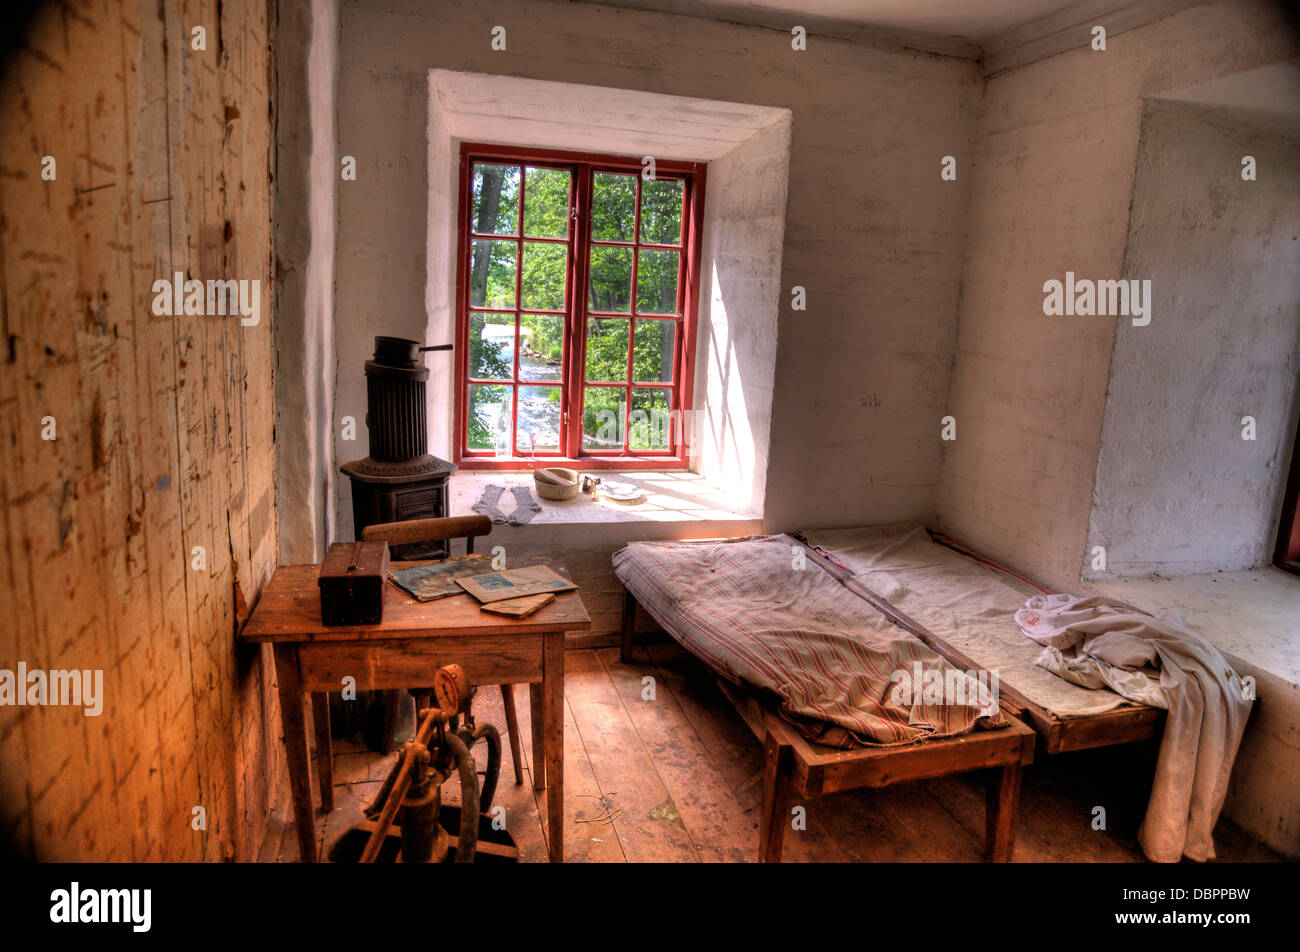 Interior of an old swedish House Stock Photo